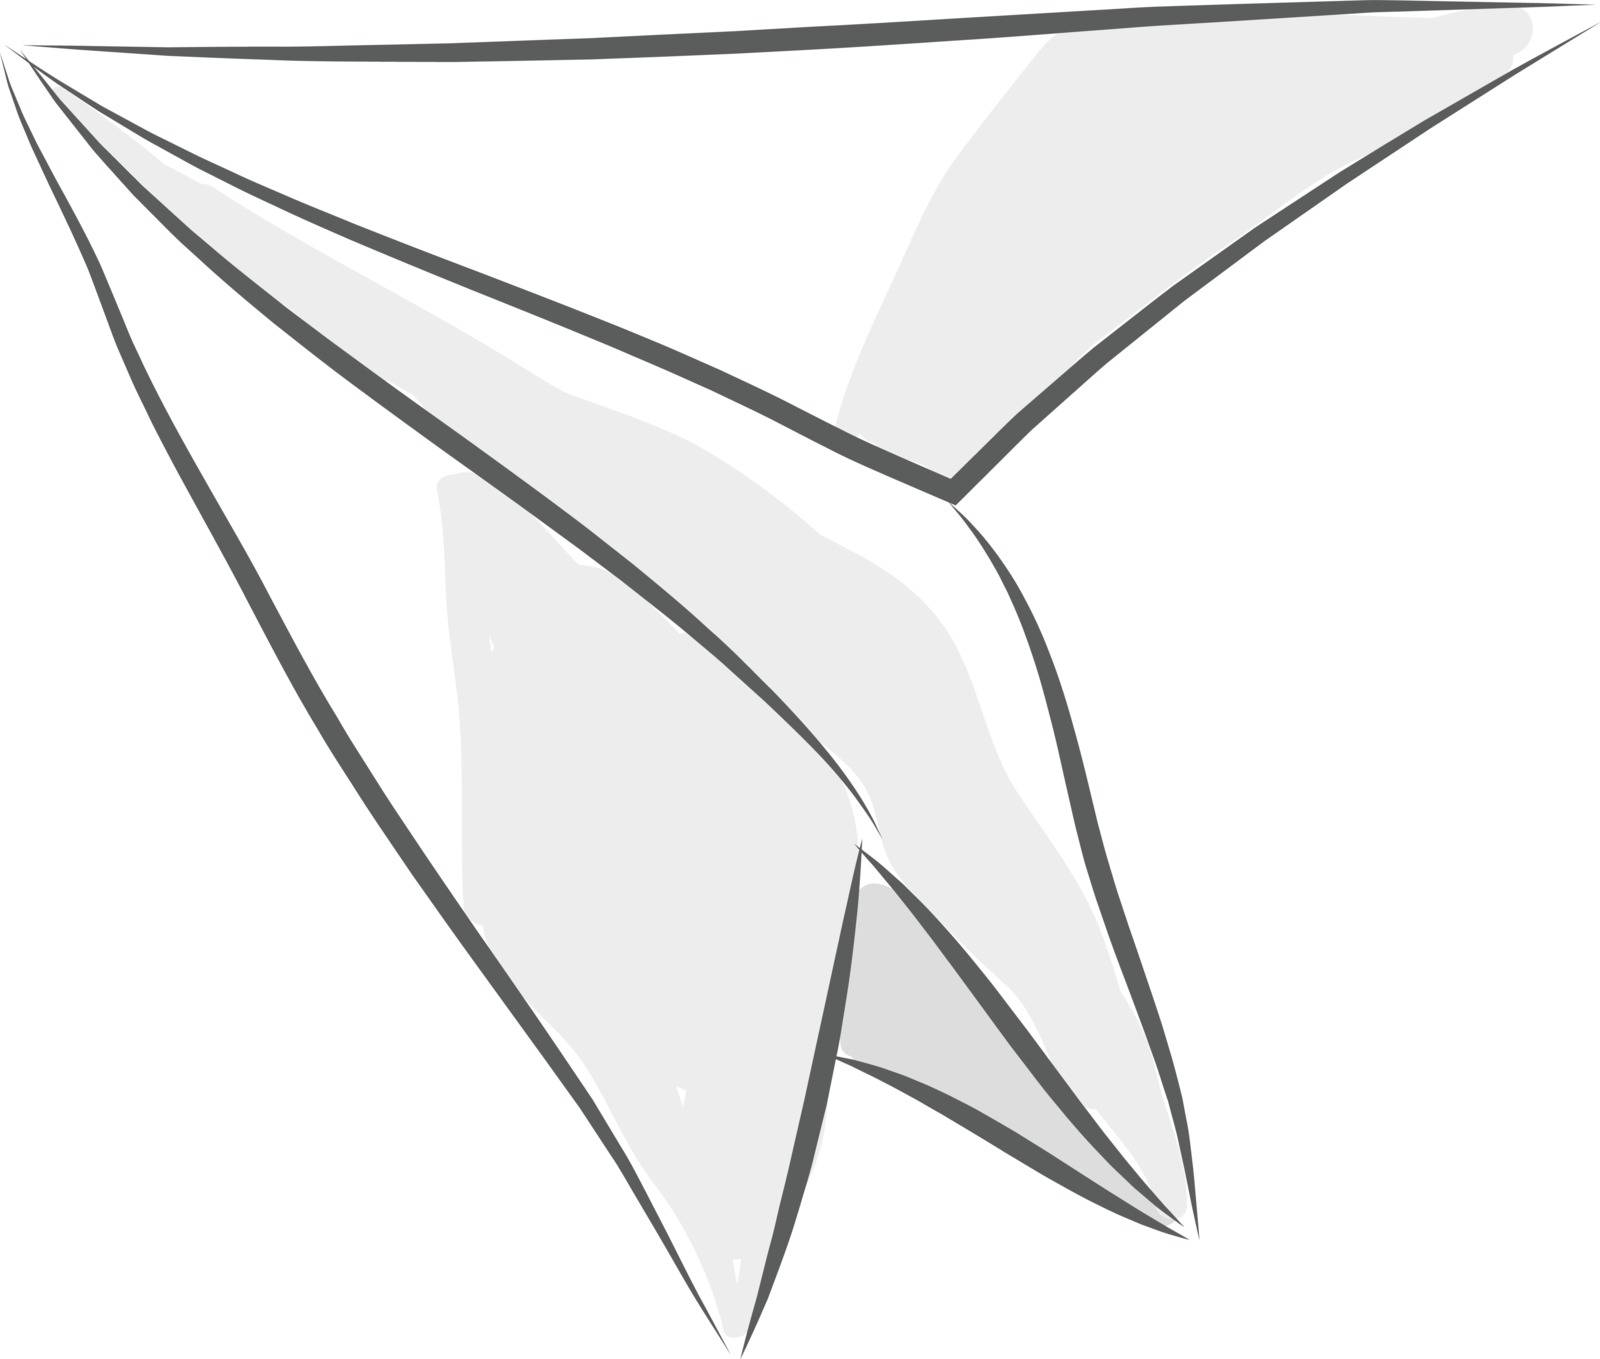 Simple black and white sketch of a paper plane  vector illustration on white background 